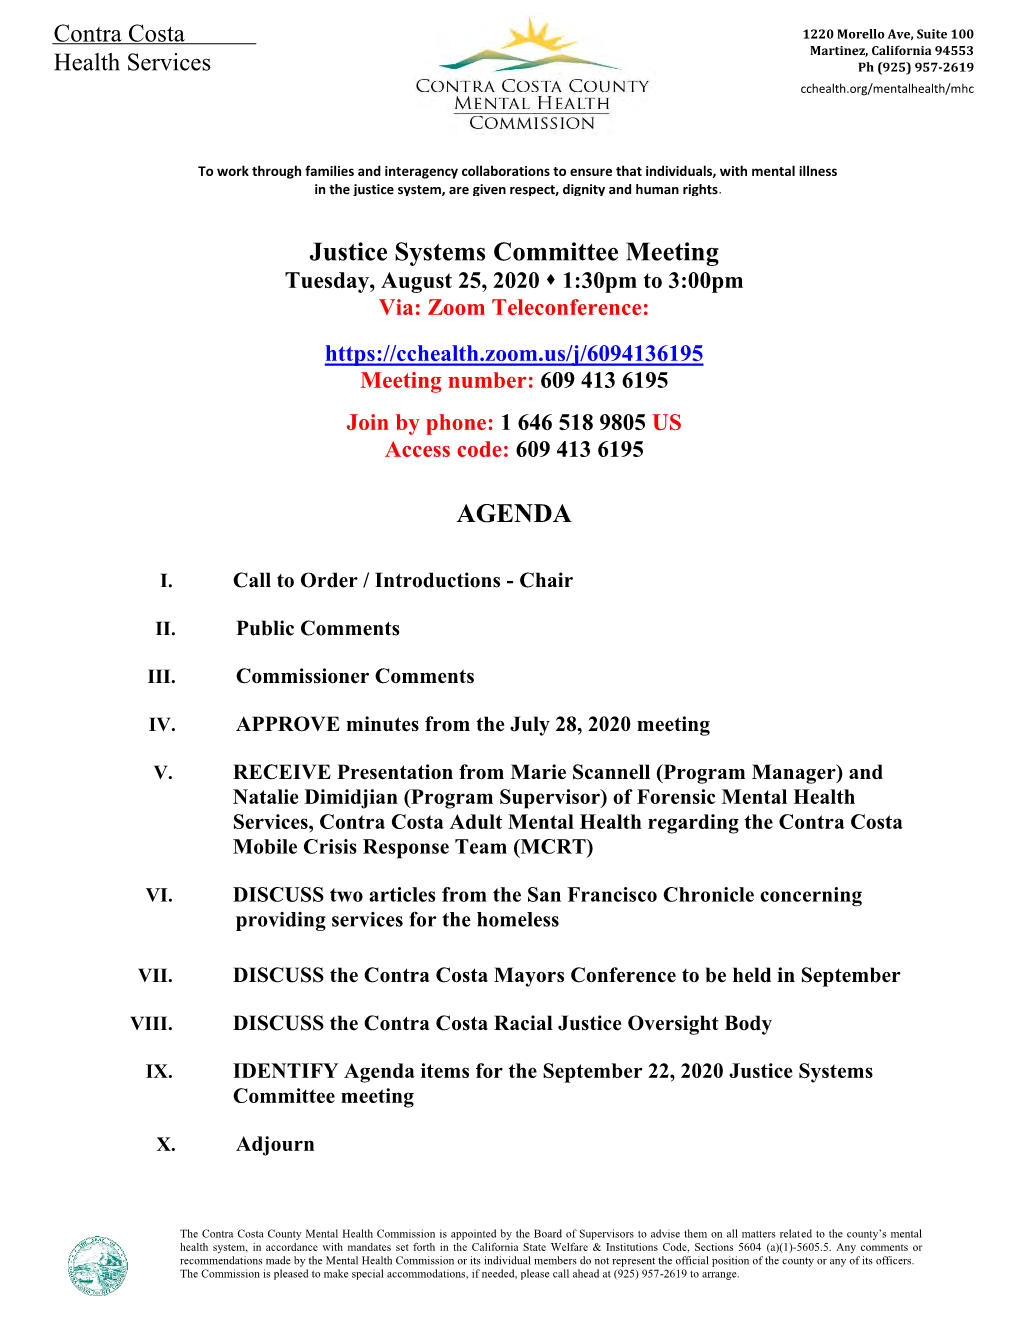 Justice Systems Committee Meeting AGENDA